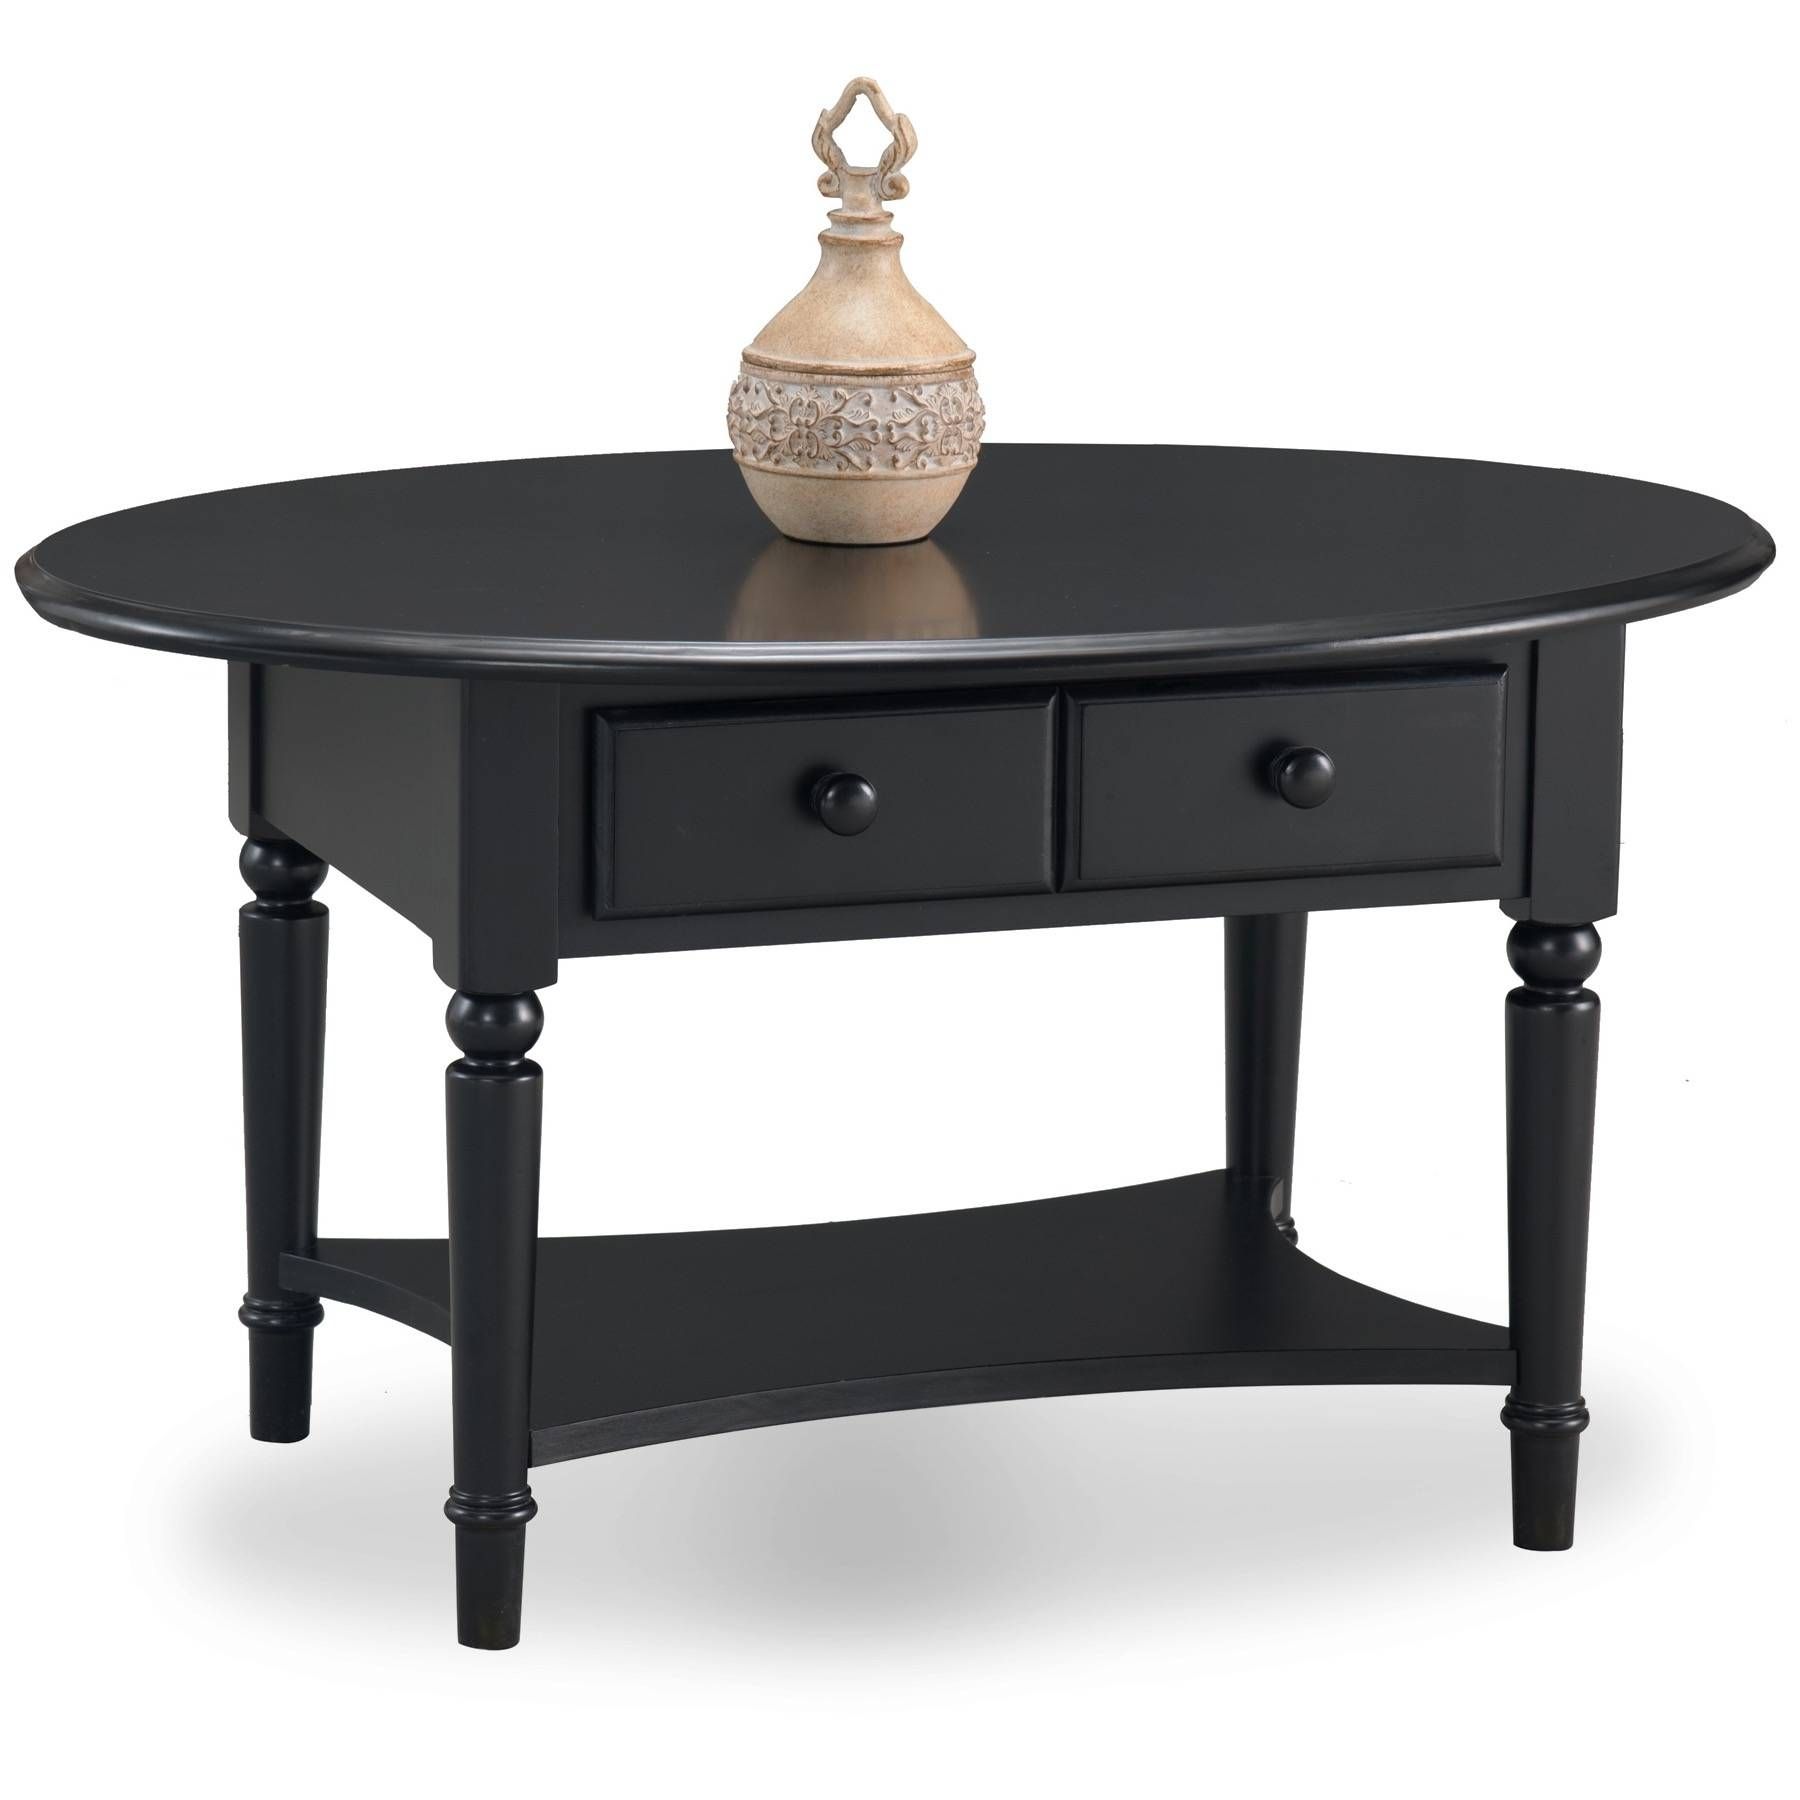 Black Oval Coffee Table The Types Of Materials To Find Best High With Regard To Black Oval Coffee Tables (View 12 of 30)